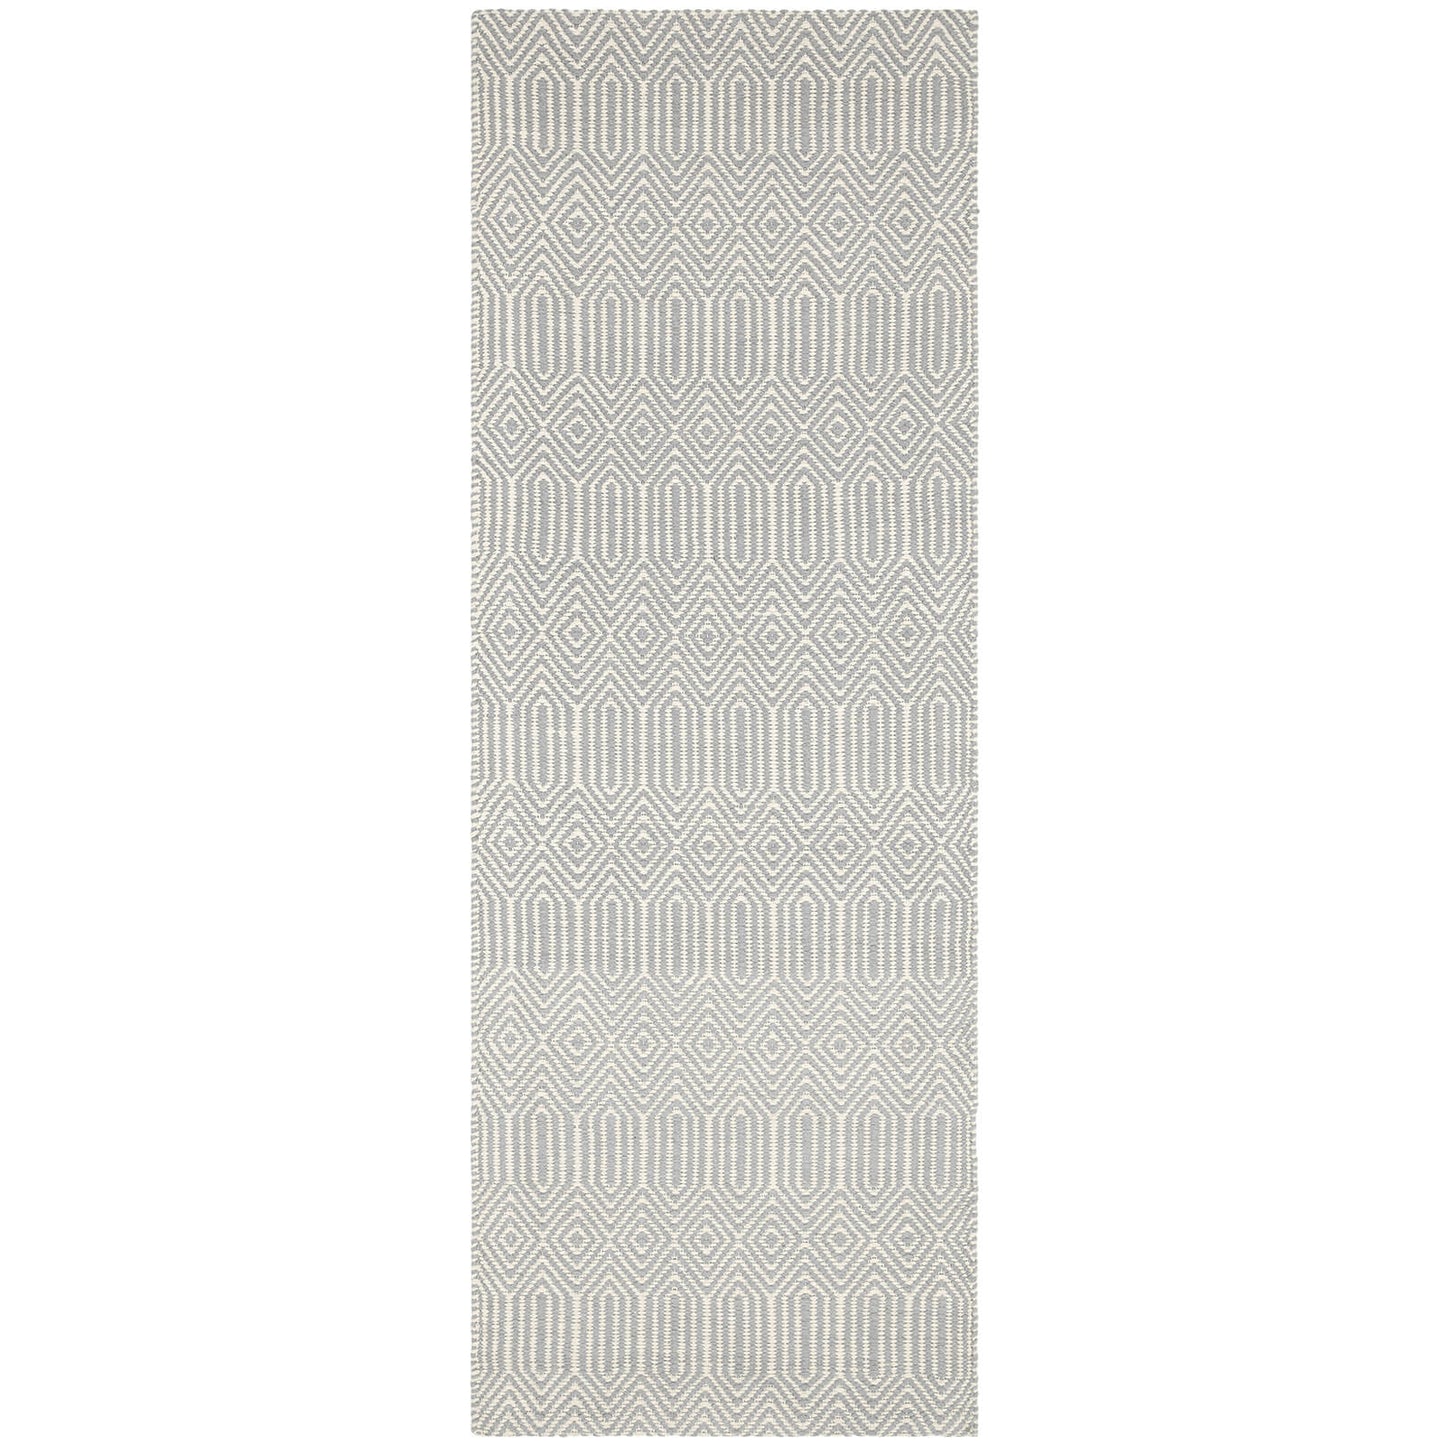 Sloan Grey and Silver Outdoor Rugs